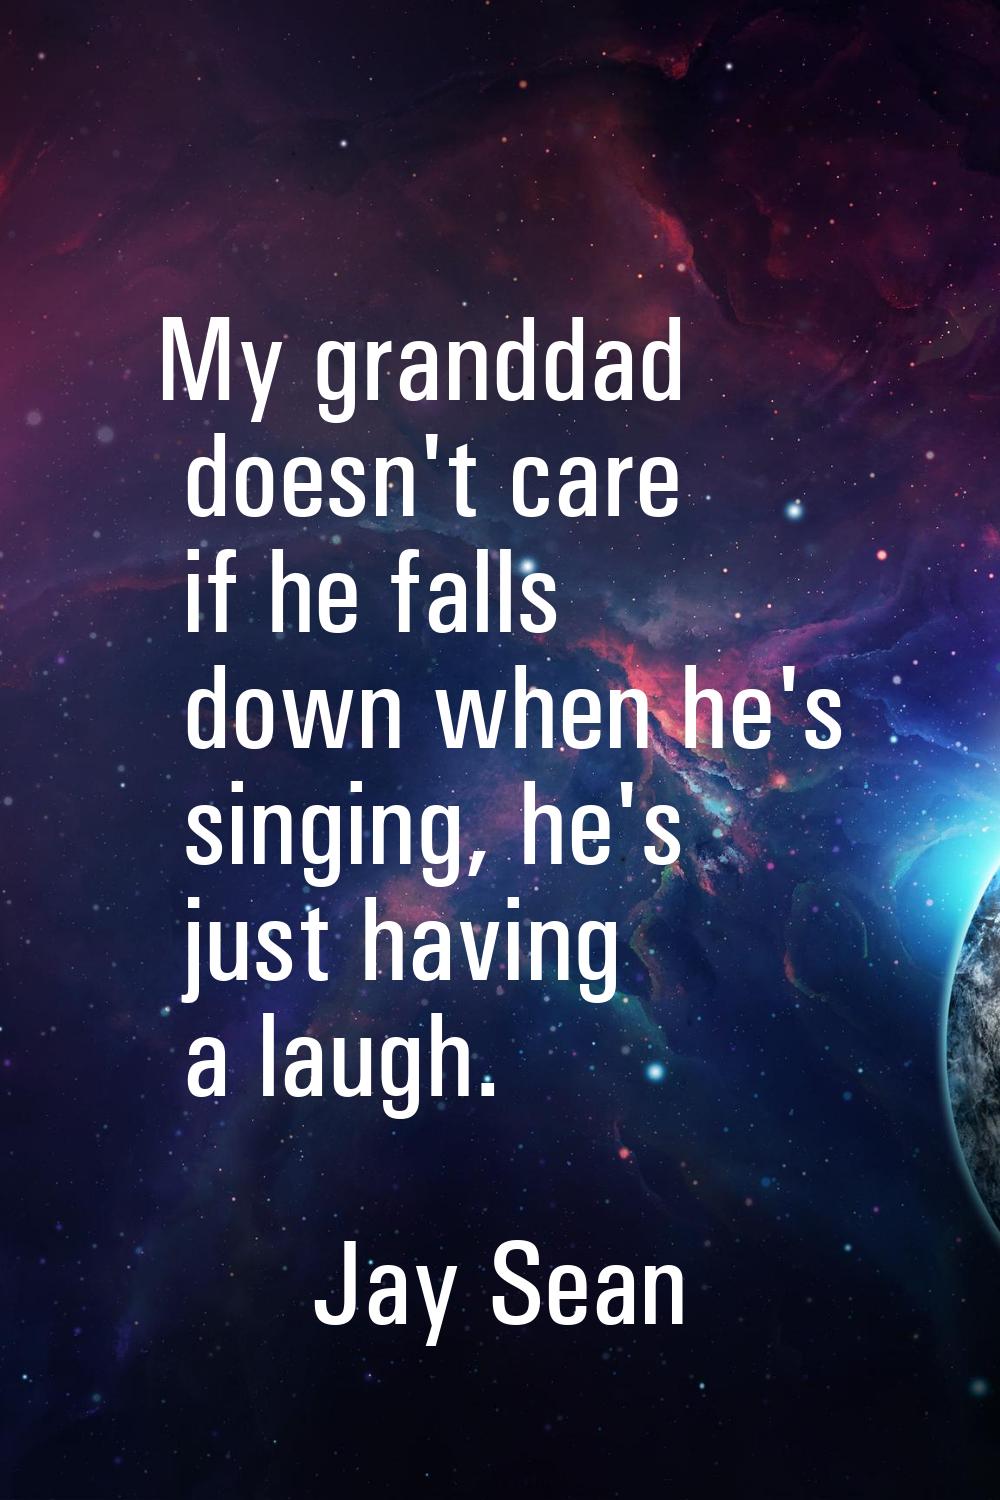 My granddad doesn't care if he falls down when he's singing, he's just having a laugh.